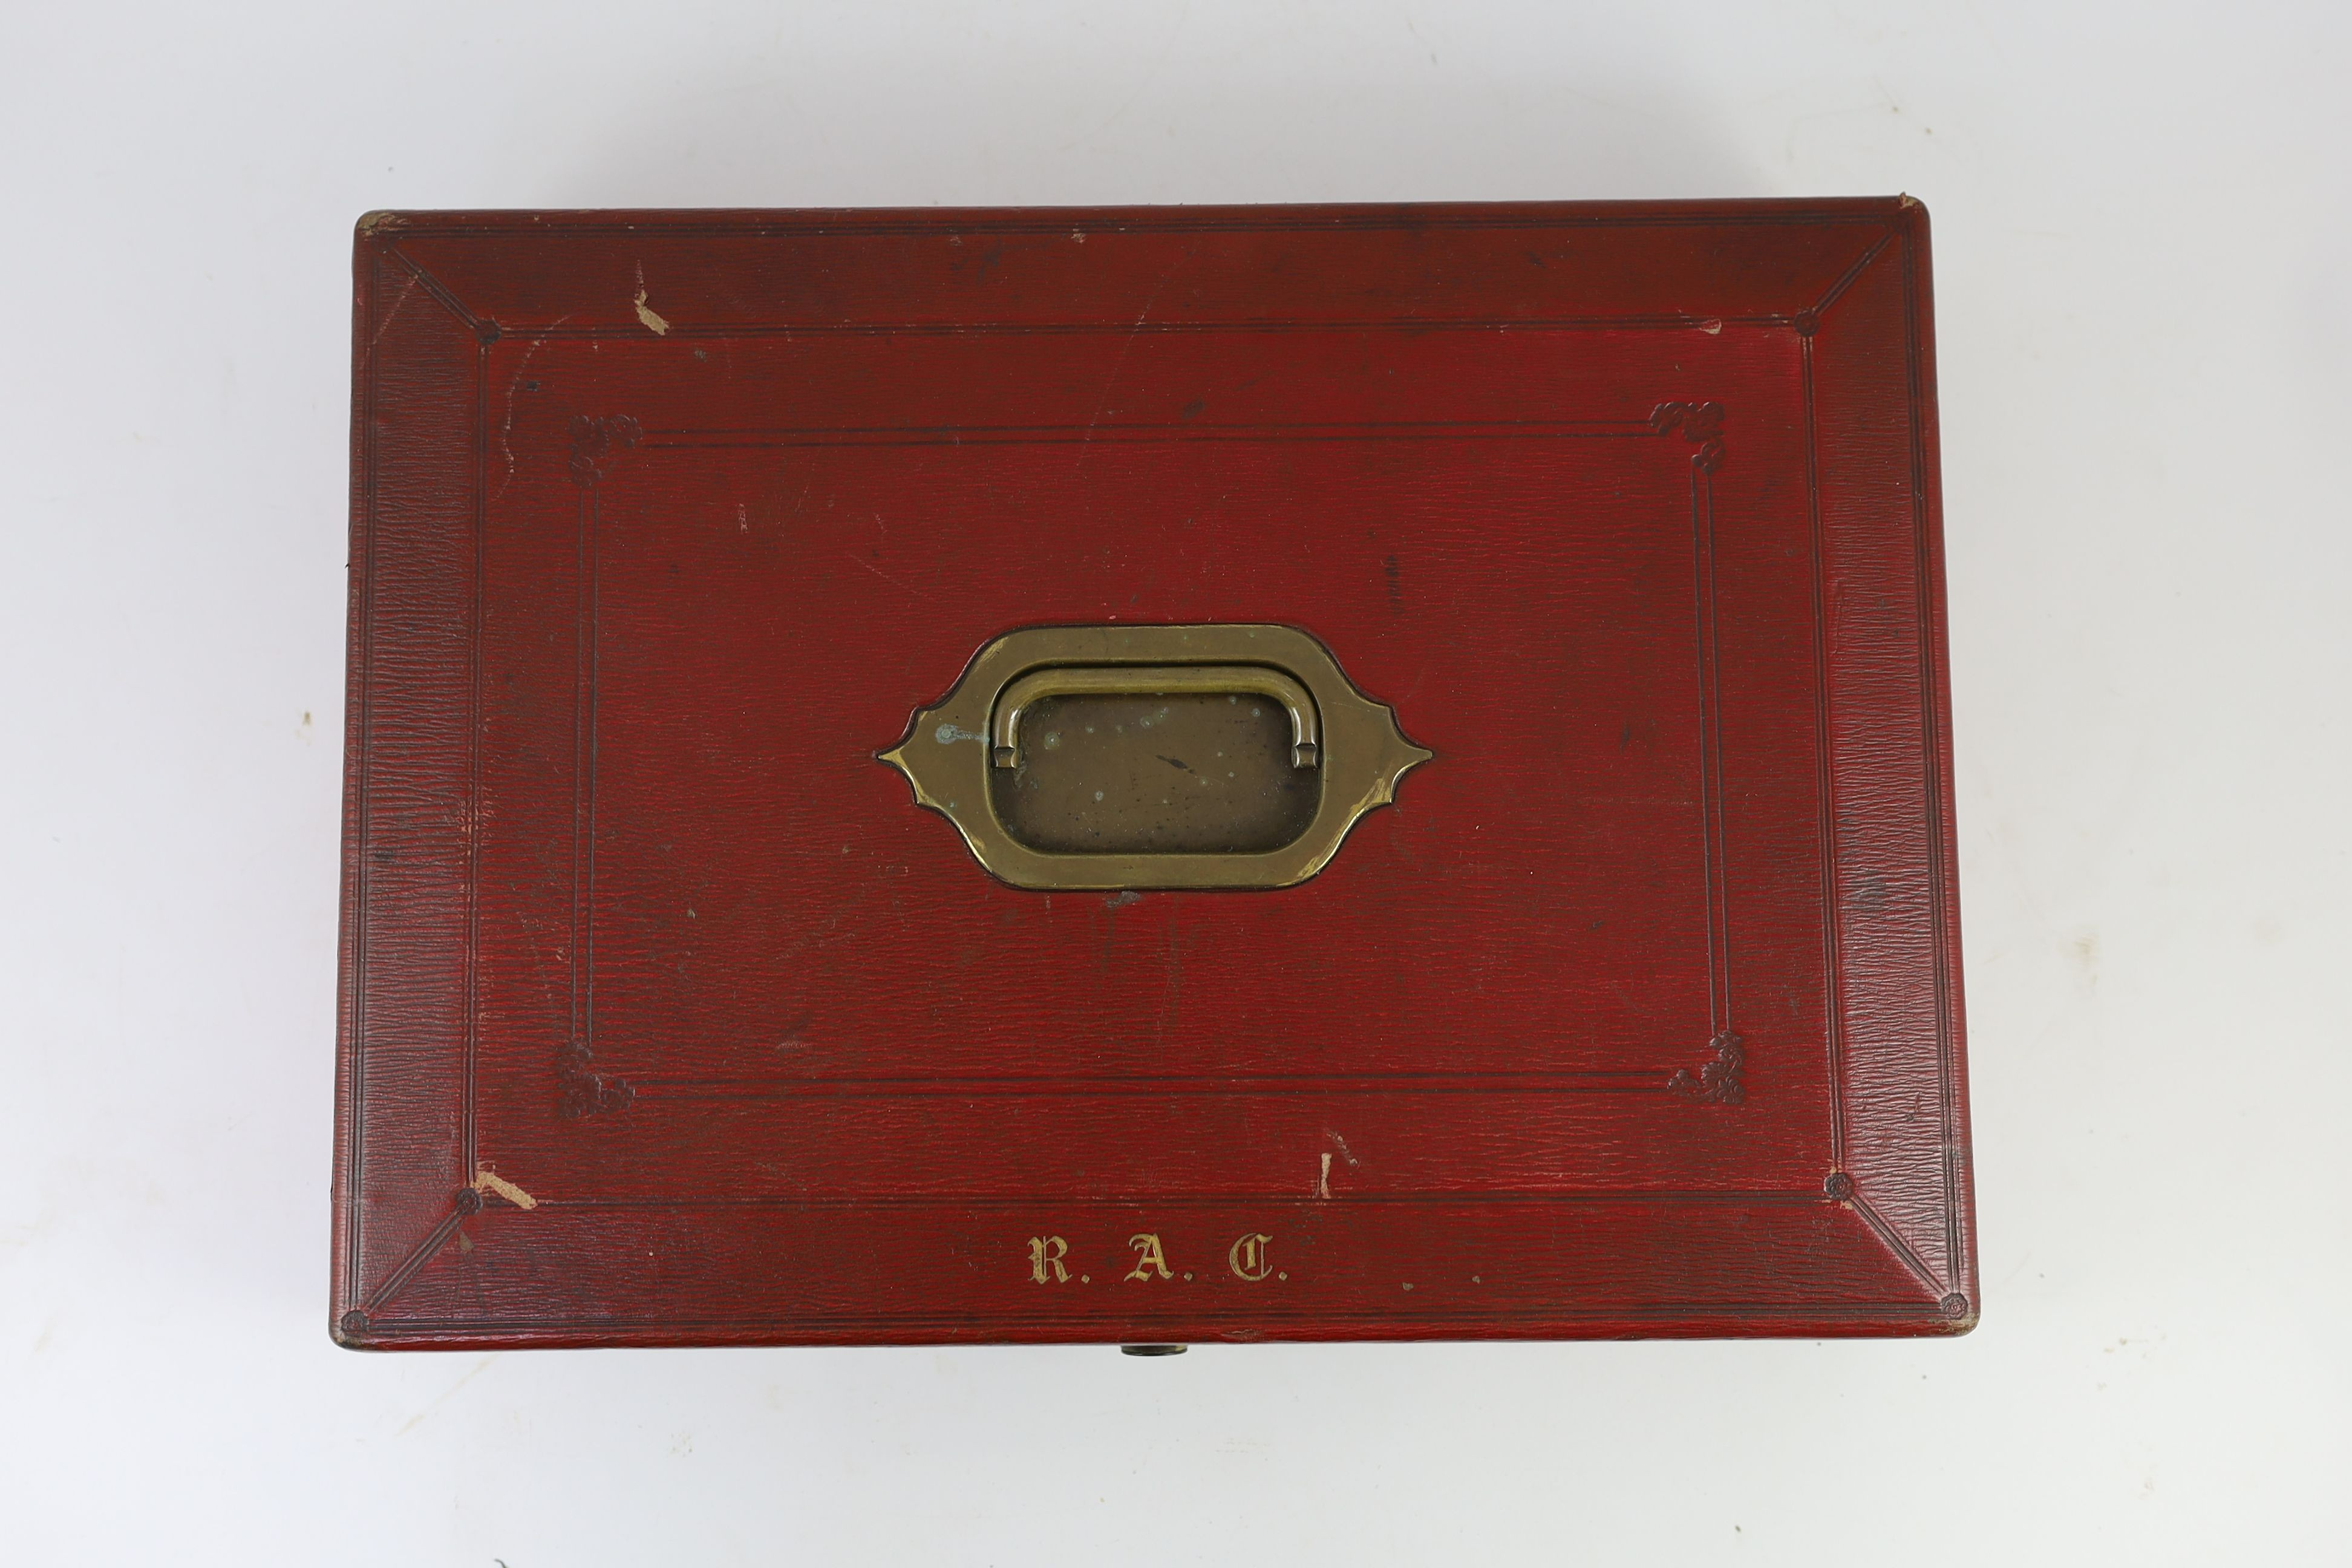 An early 20th century red morocco despatch box, formerly the property of Richard Assheton Cross, b.1882, width 42cm, depth 30cm, height 9.5cm